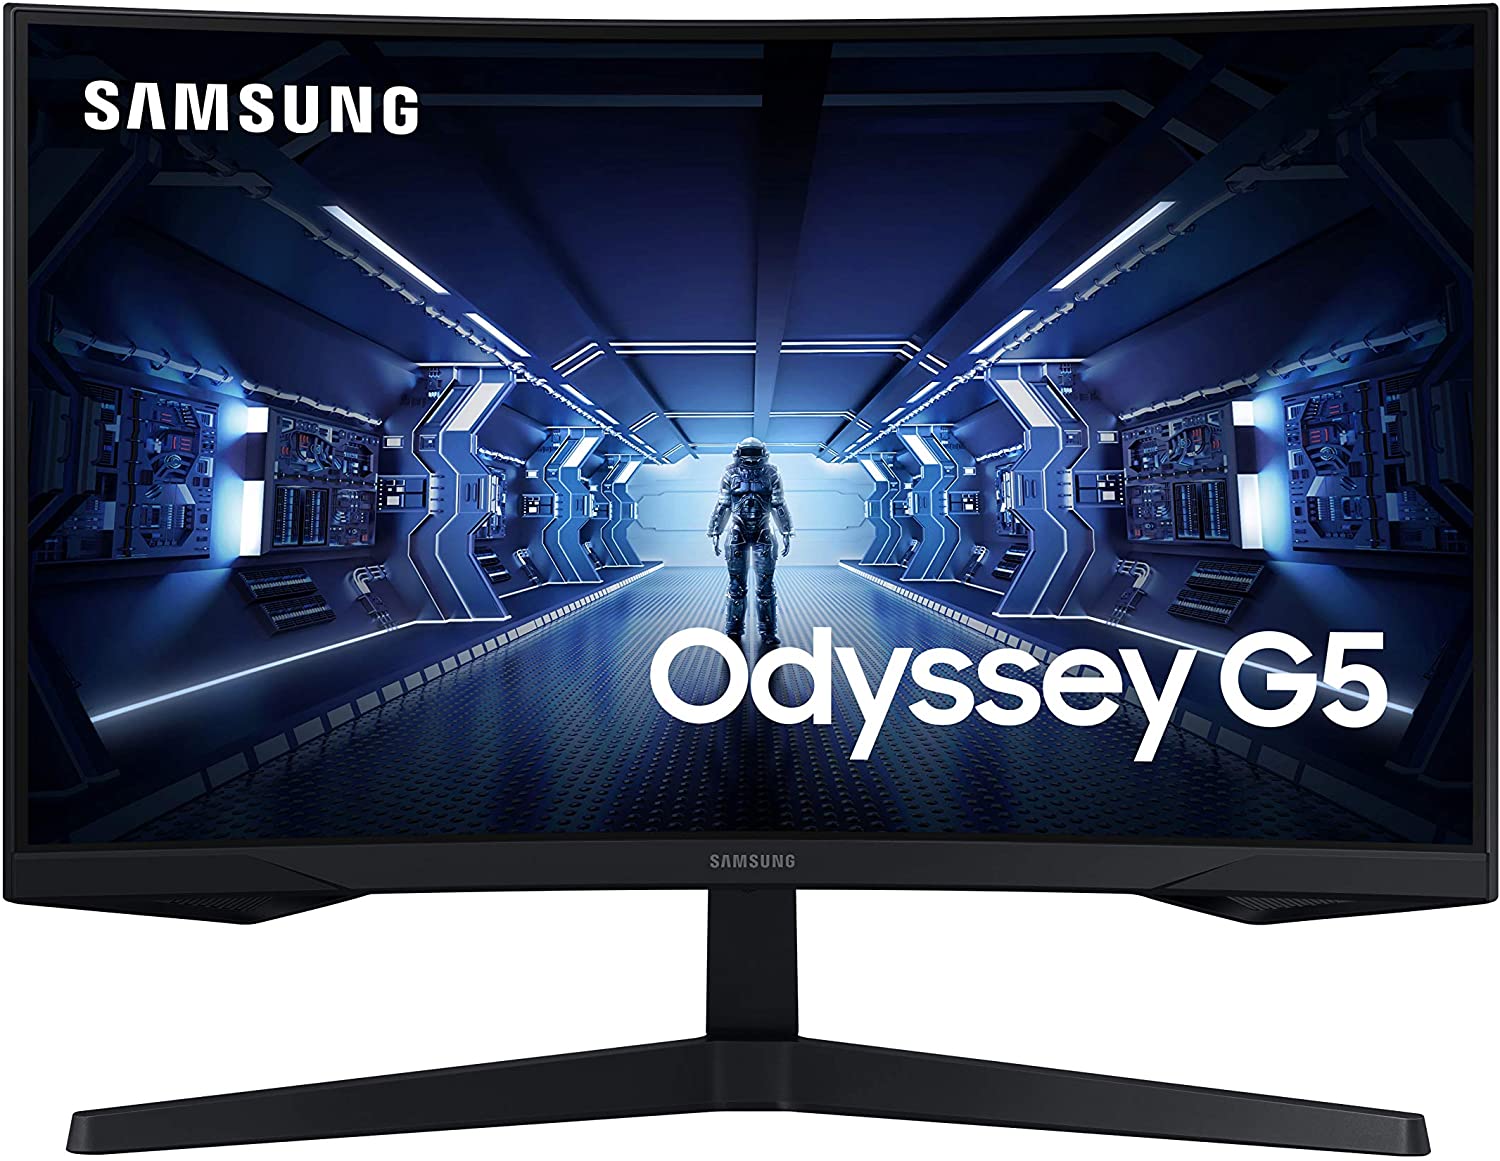 SAMSUNG 27-Inch Odyssey G5 1440p Gaming Monitor with 1000R Curved Screen, 144Hz, 1ms, FreeSync Premium, QHD $259.99